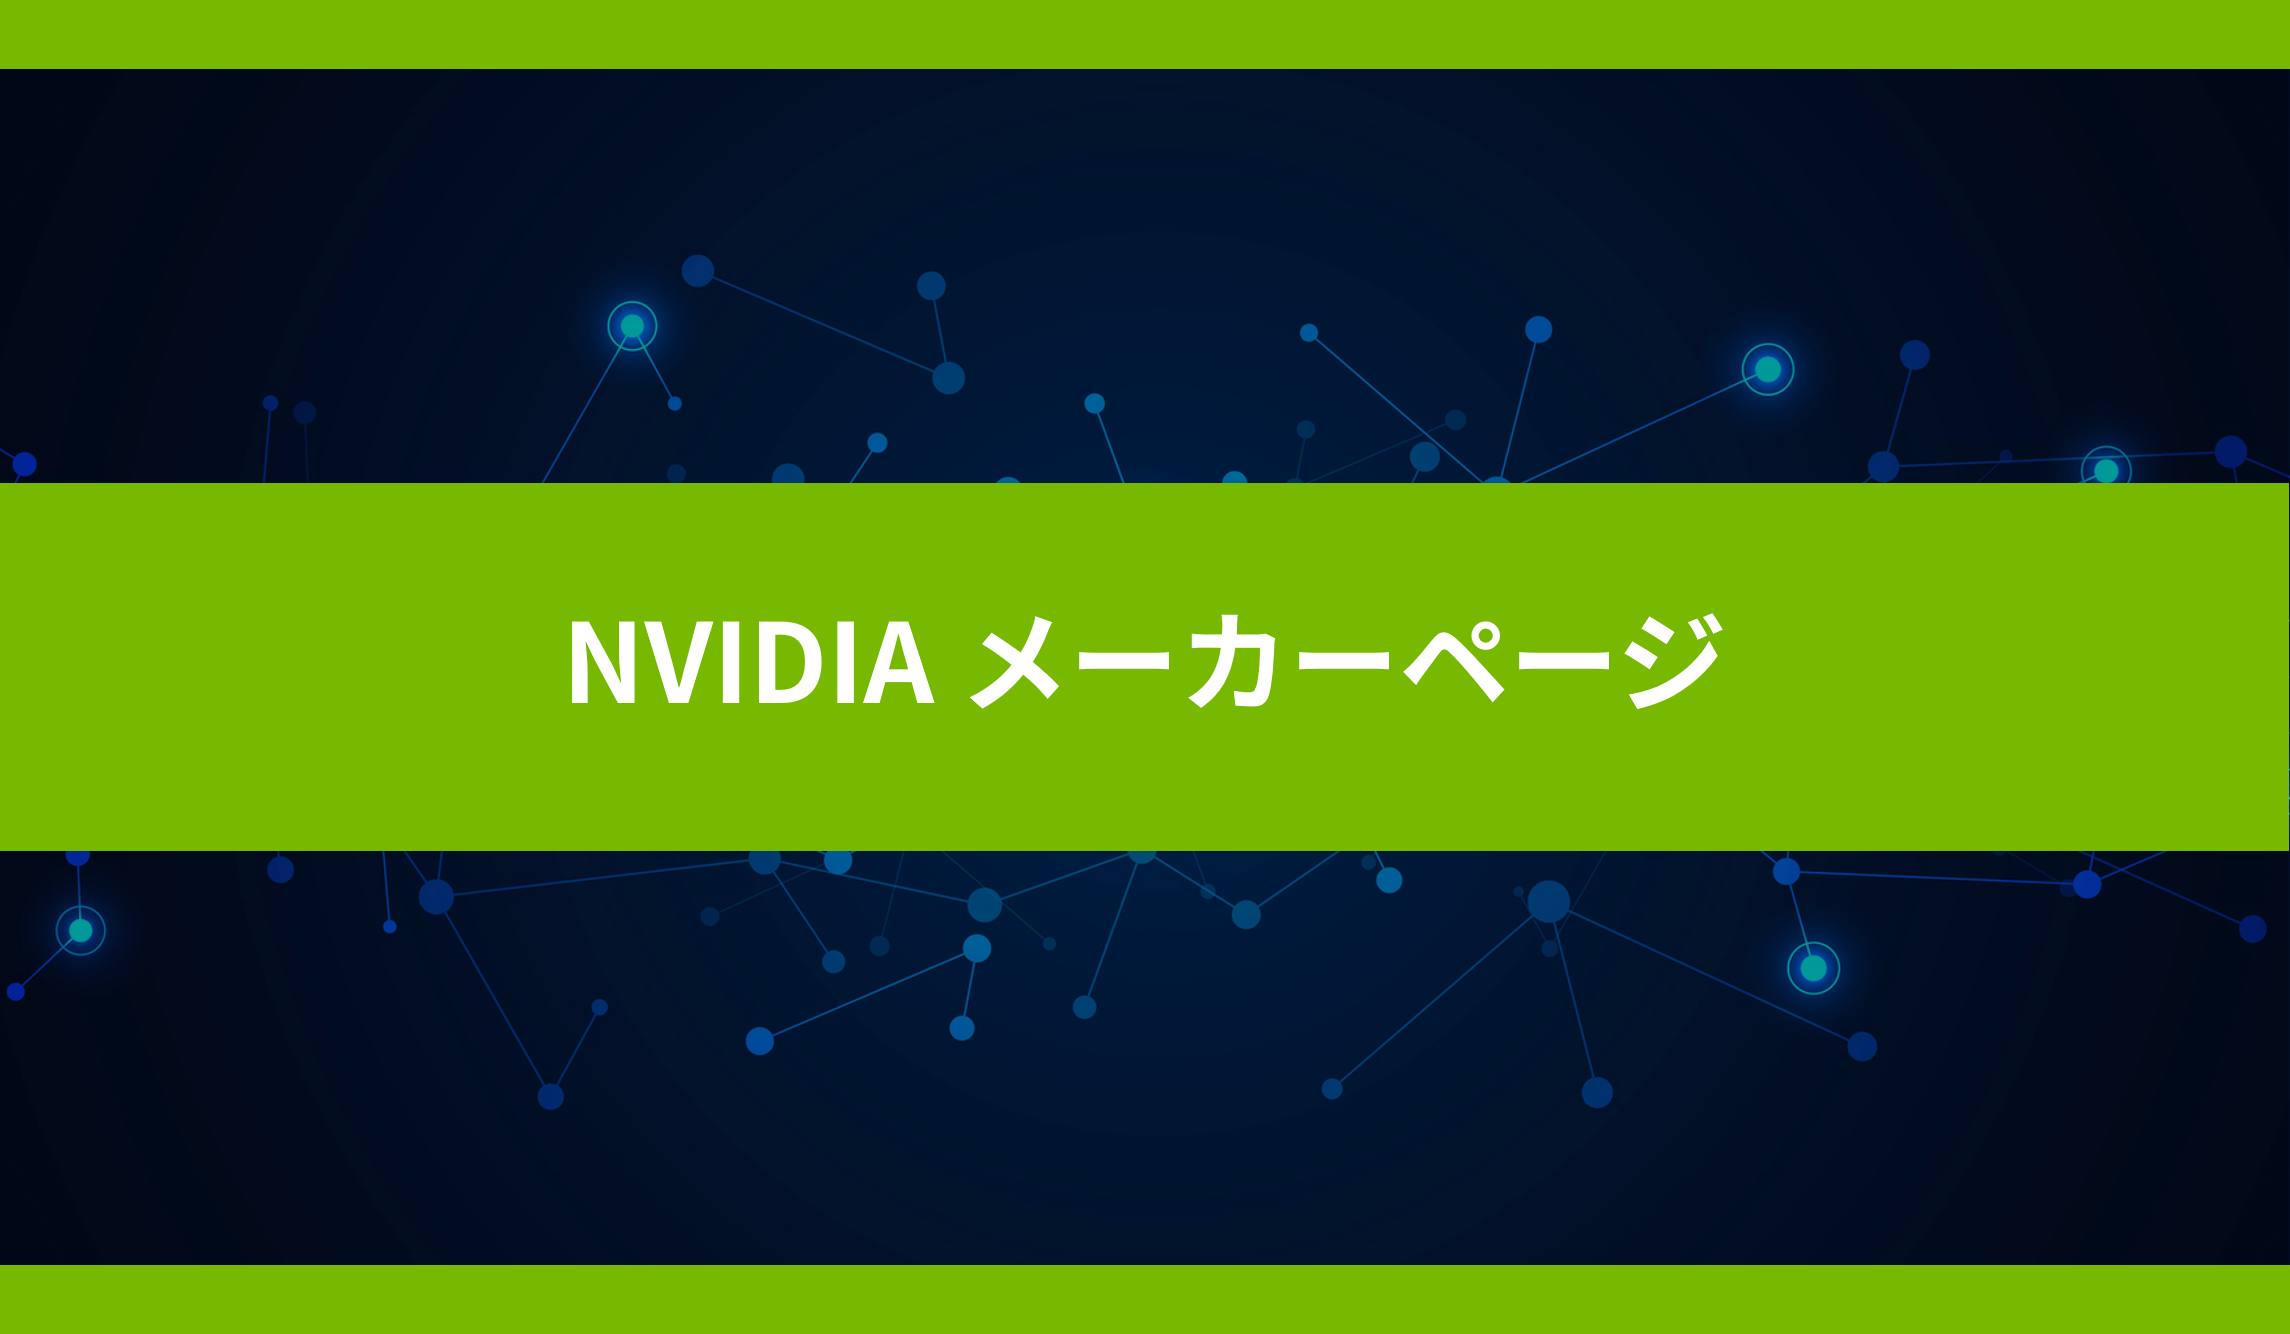 Thumbnail image of NVIDIA manufacturer page